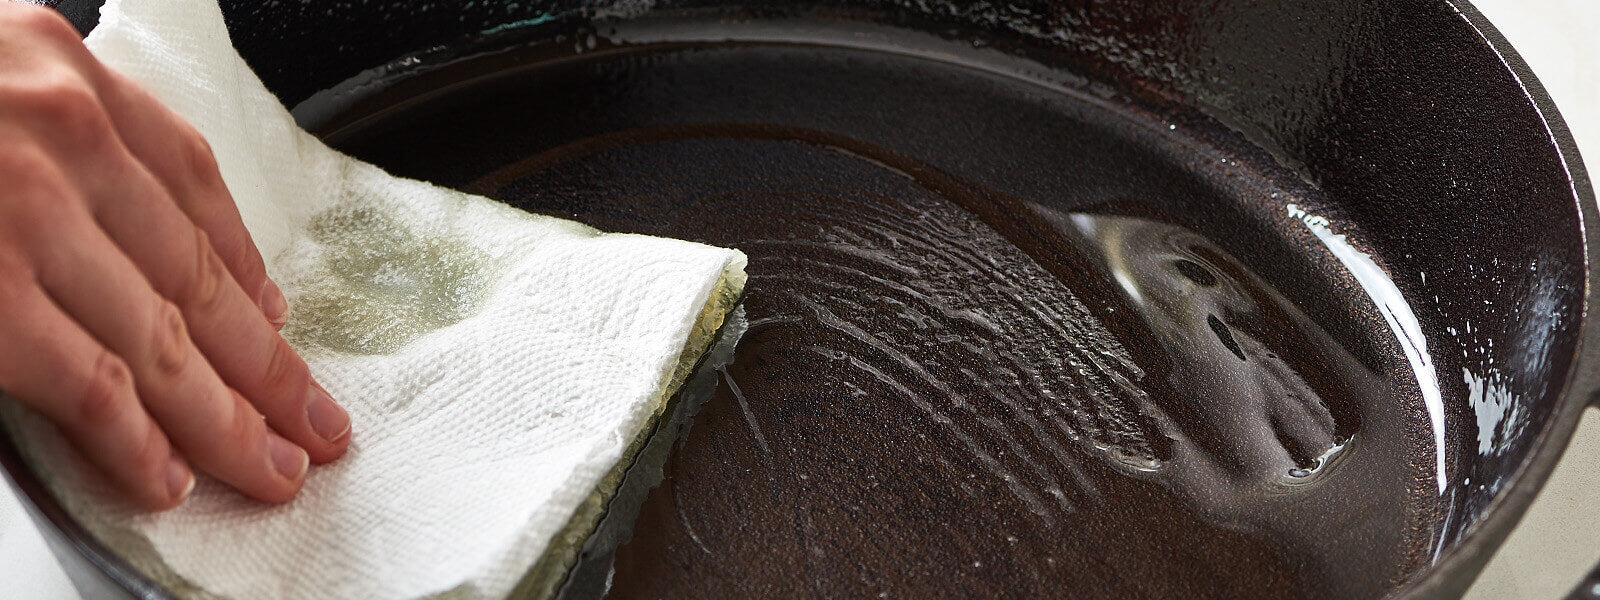 How to Maintain Your Cast Iron Cookware